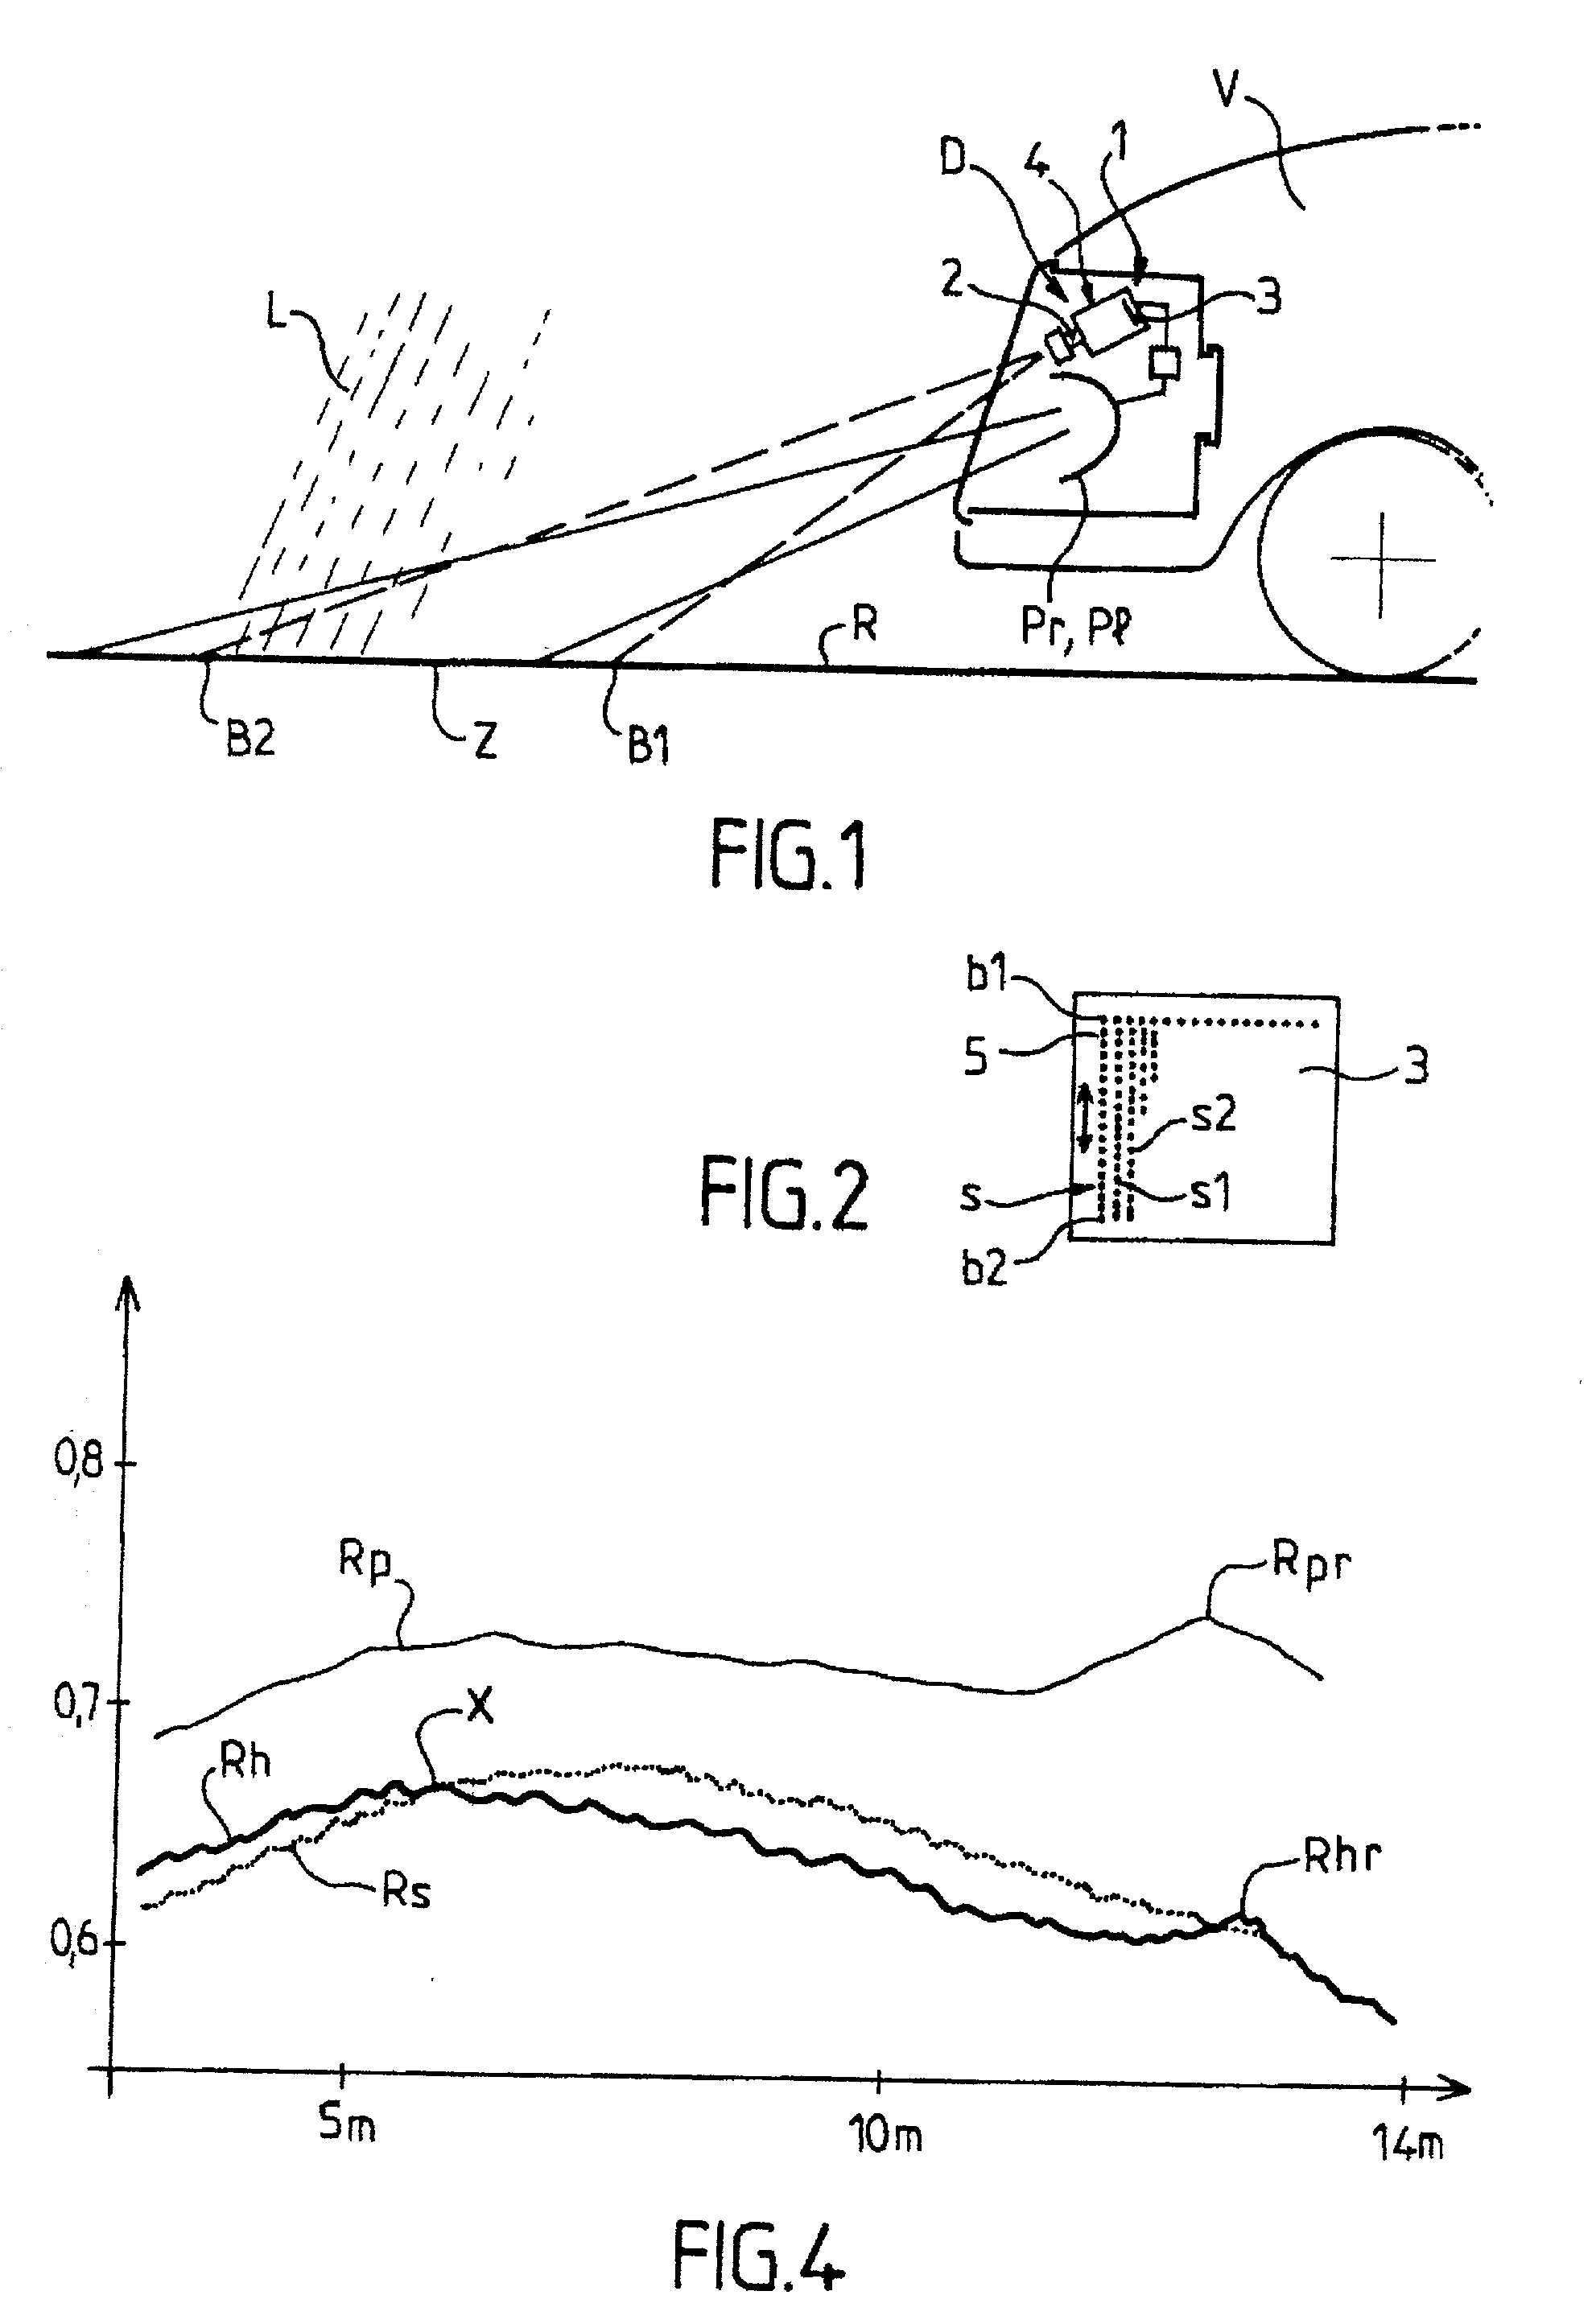 Method and apparatus for detecting the state of humidity on a road on which a vehicle is travelling